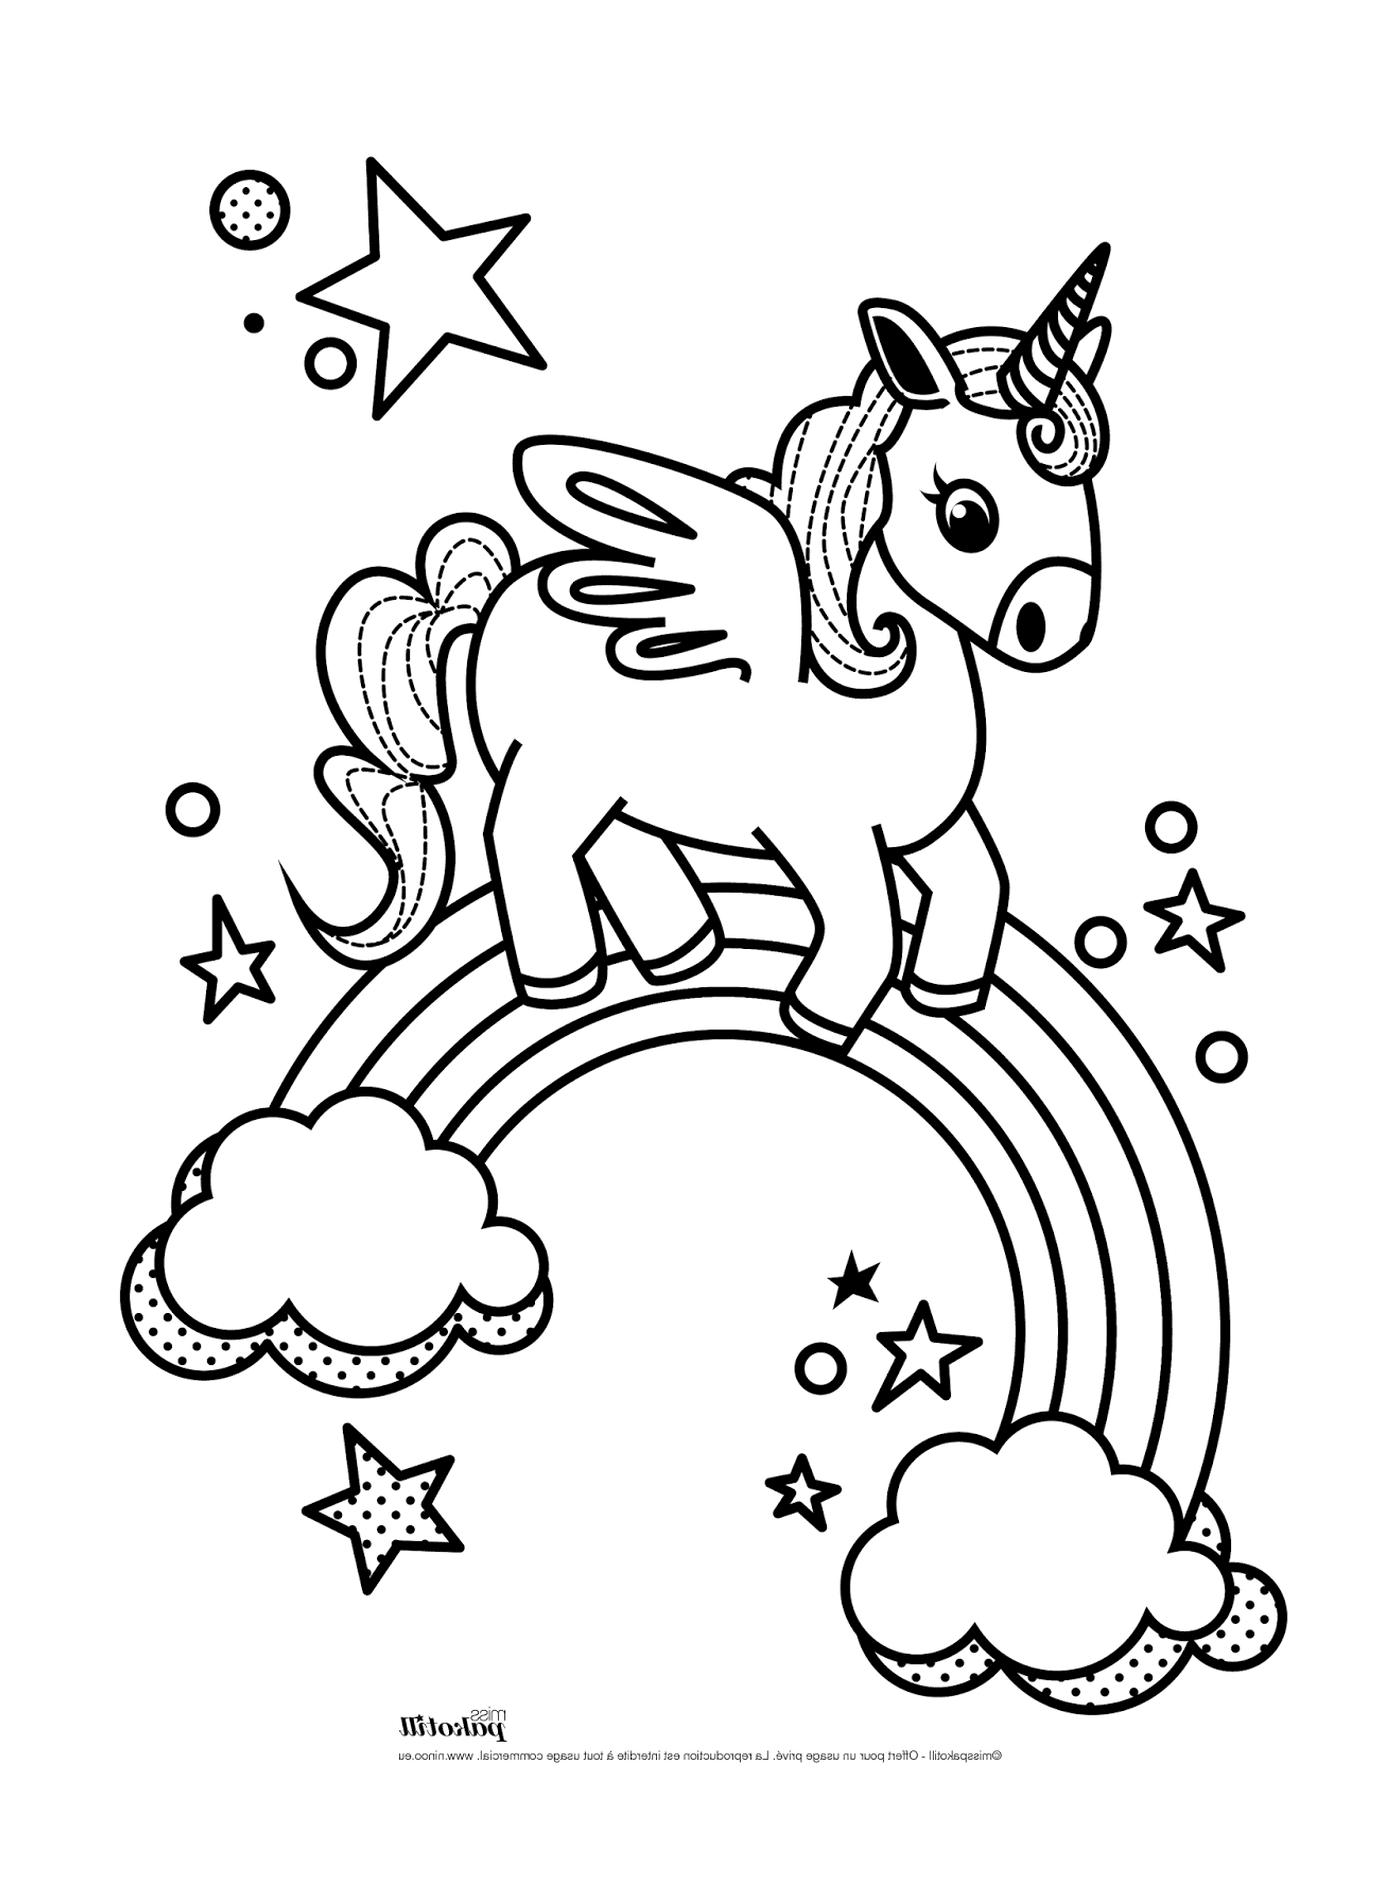  unicorn with wings, adorable and cute 